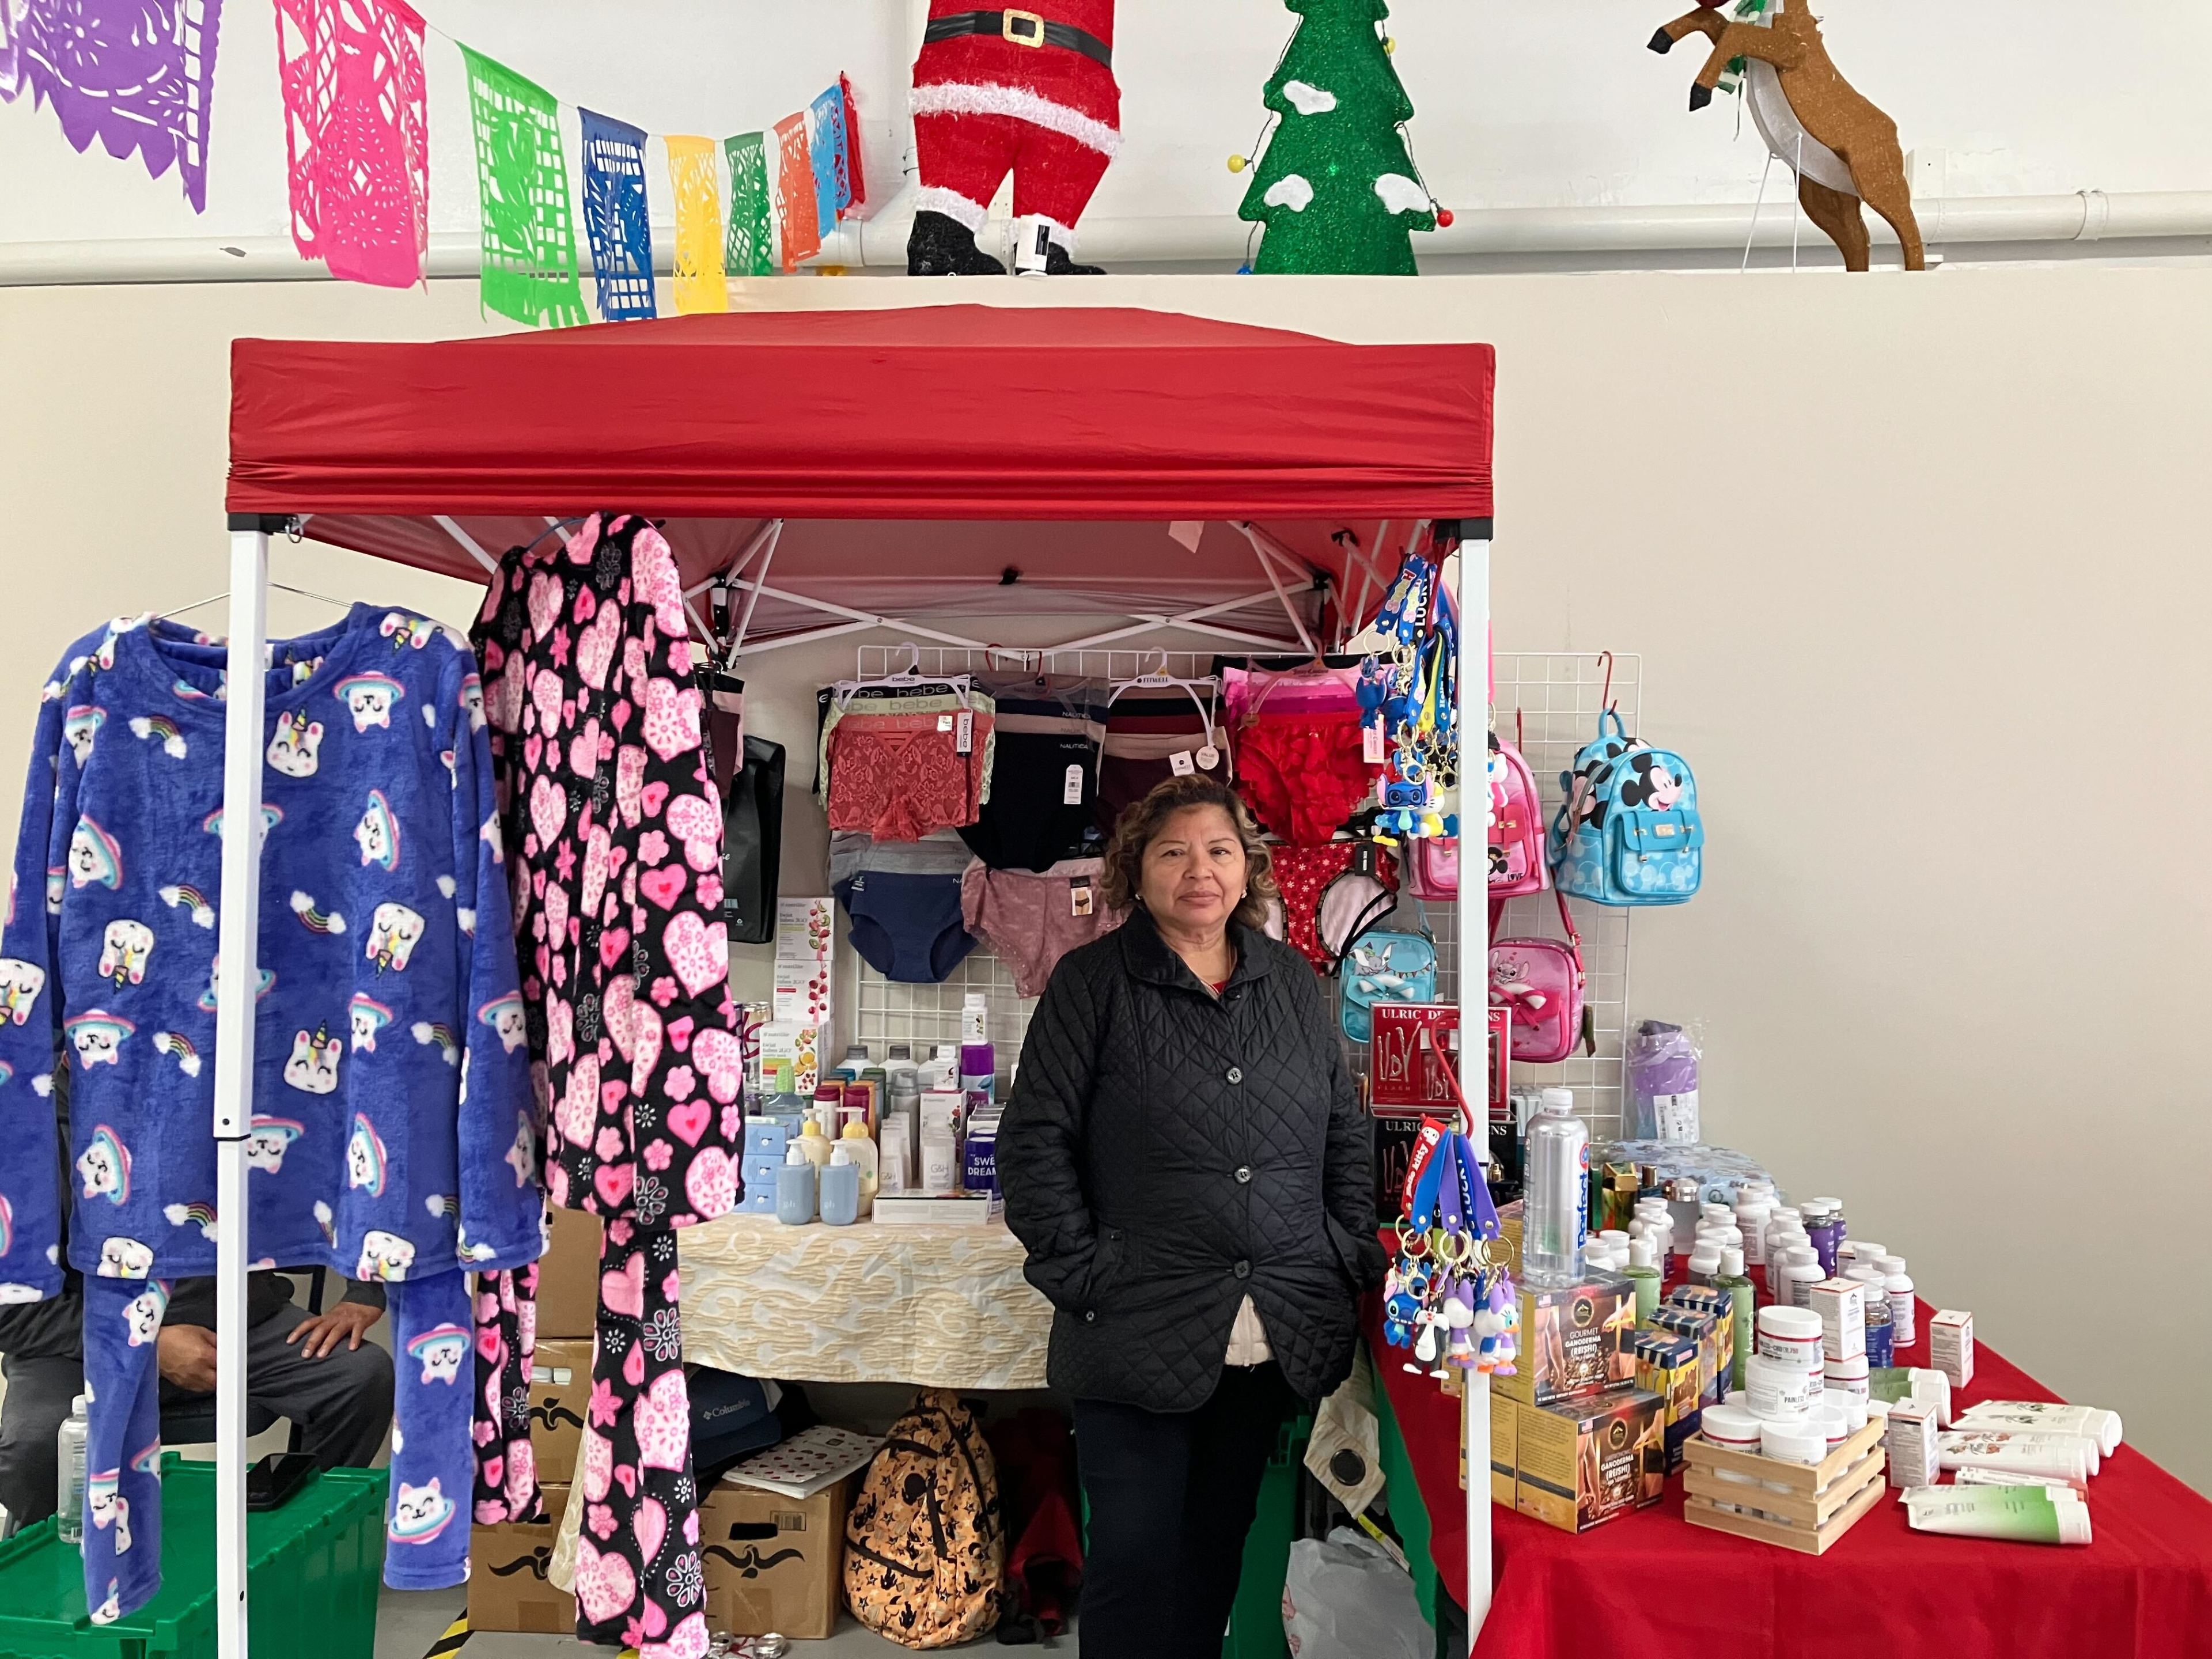 Maria Avila stands next to her items inside the vendor space at 2137 Mission Street. Avila says she has only made $20-30 in the six days of being at the location.